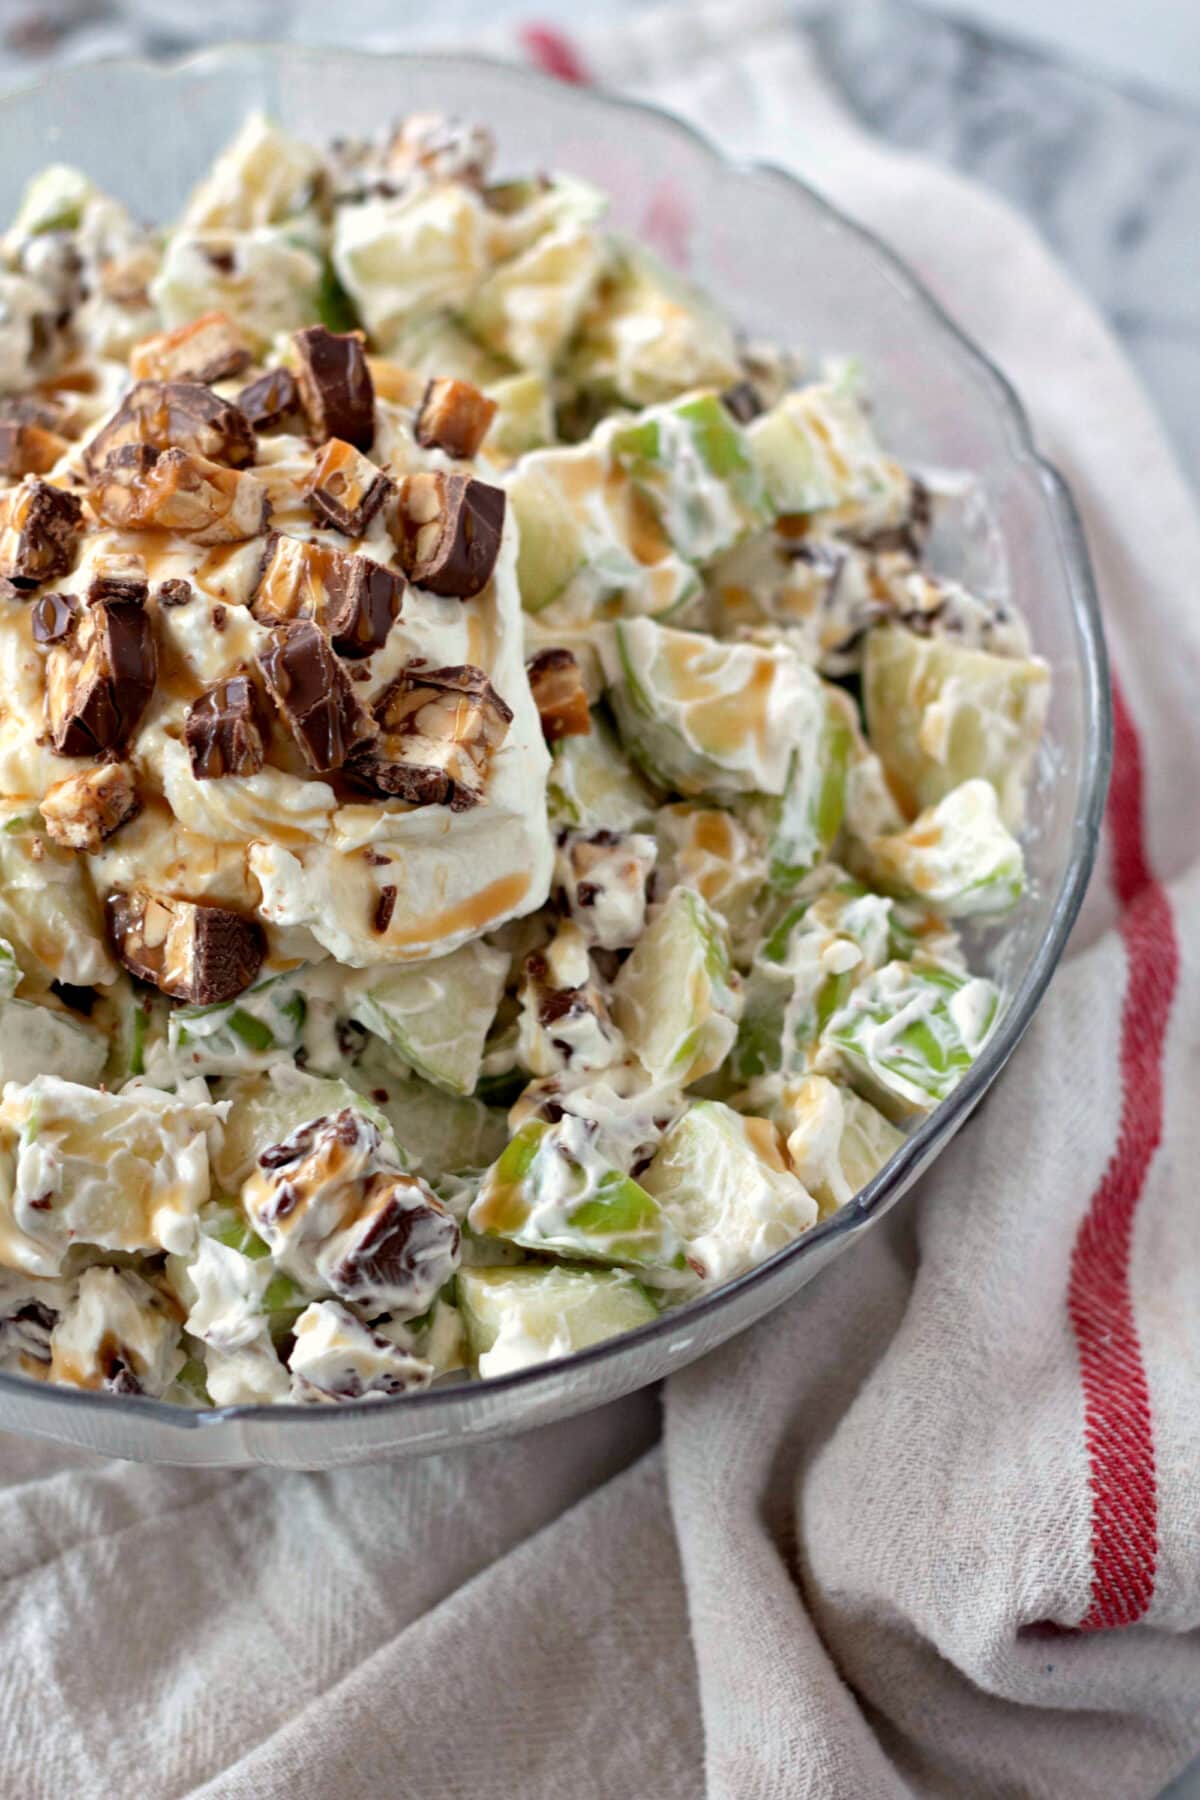 Snicker Salad with Apples, Caramel, Cream Cheese and Snickers Candy Bars